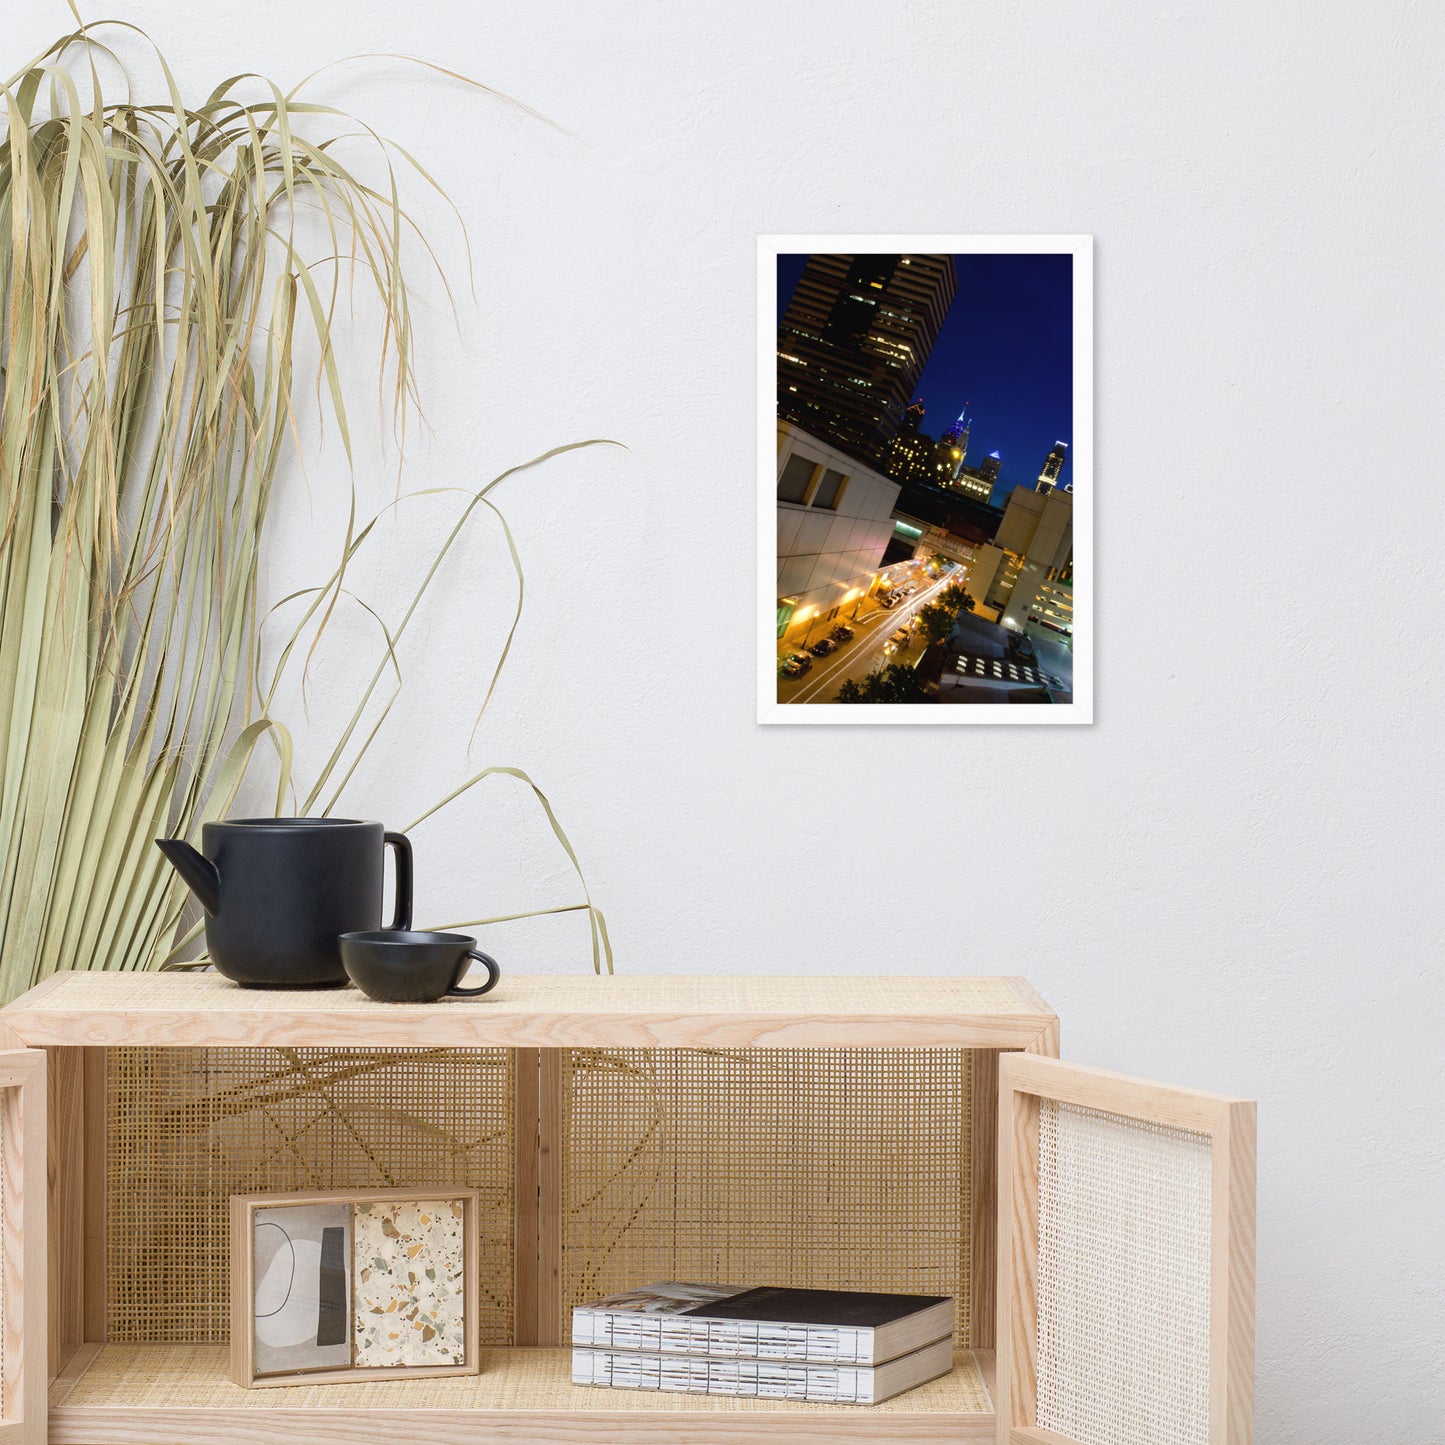 Light Trails in Philly Urban Landscape Photo Framed Wall Art Print